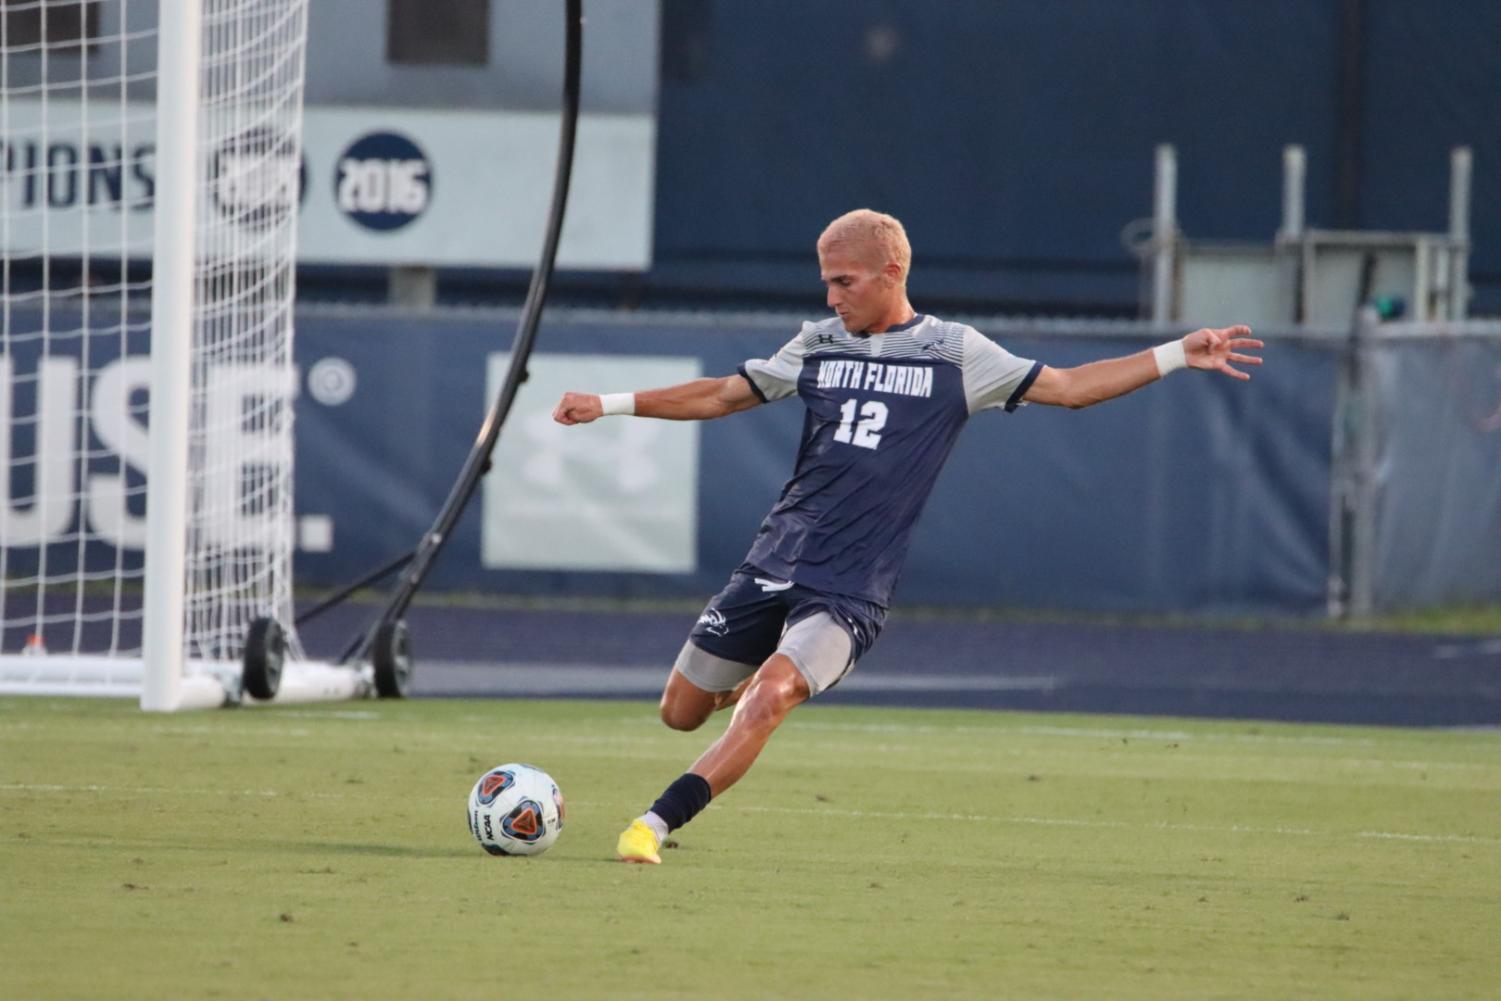 UNF soccer player prepares to kick the ball downfield.